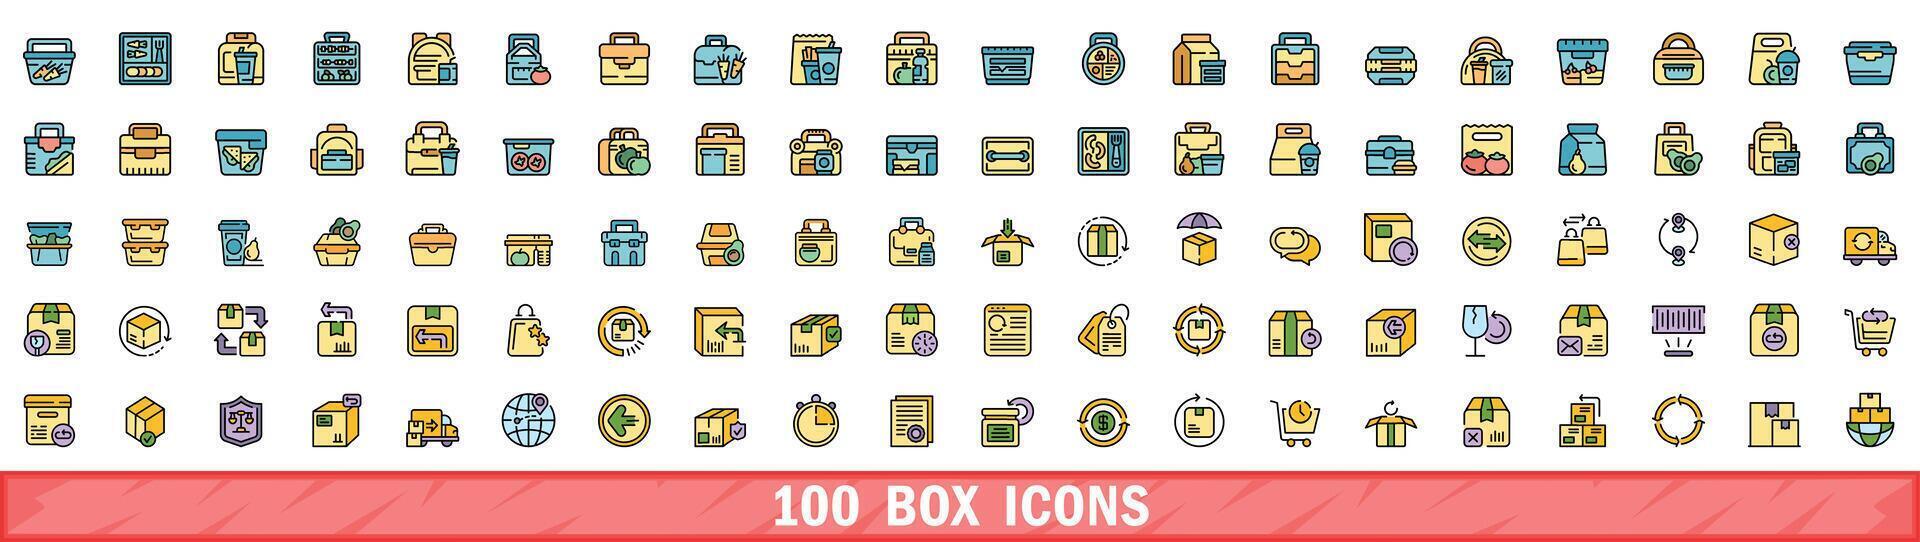 100 box icons set, color line style vector